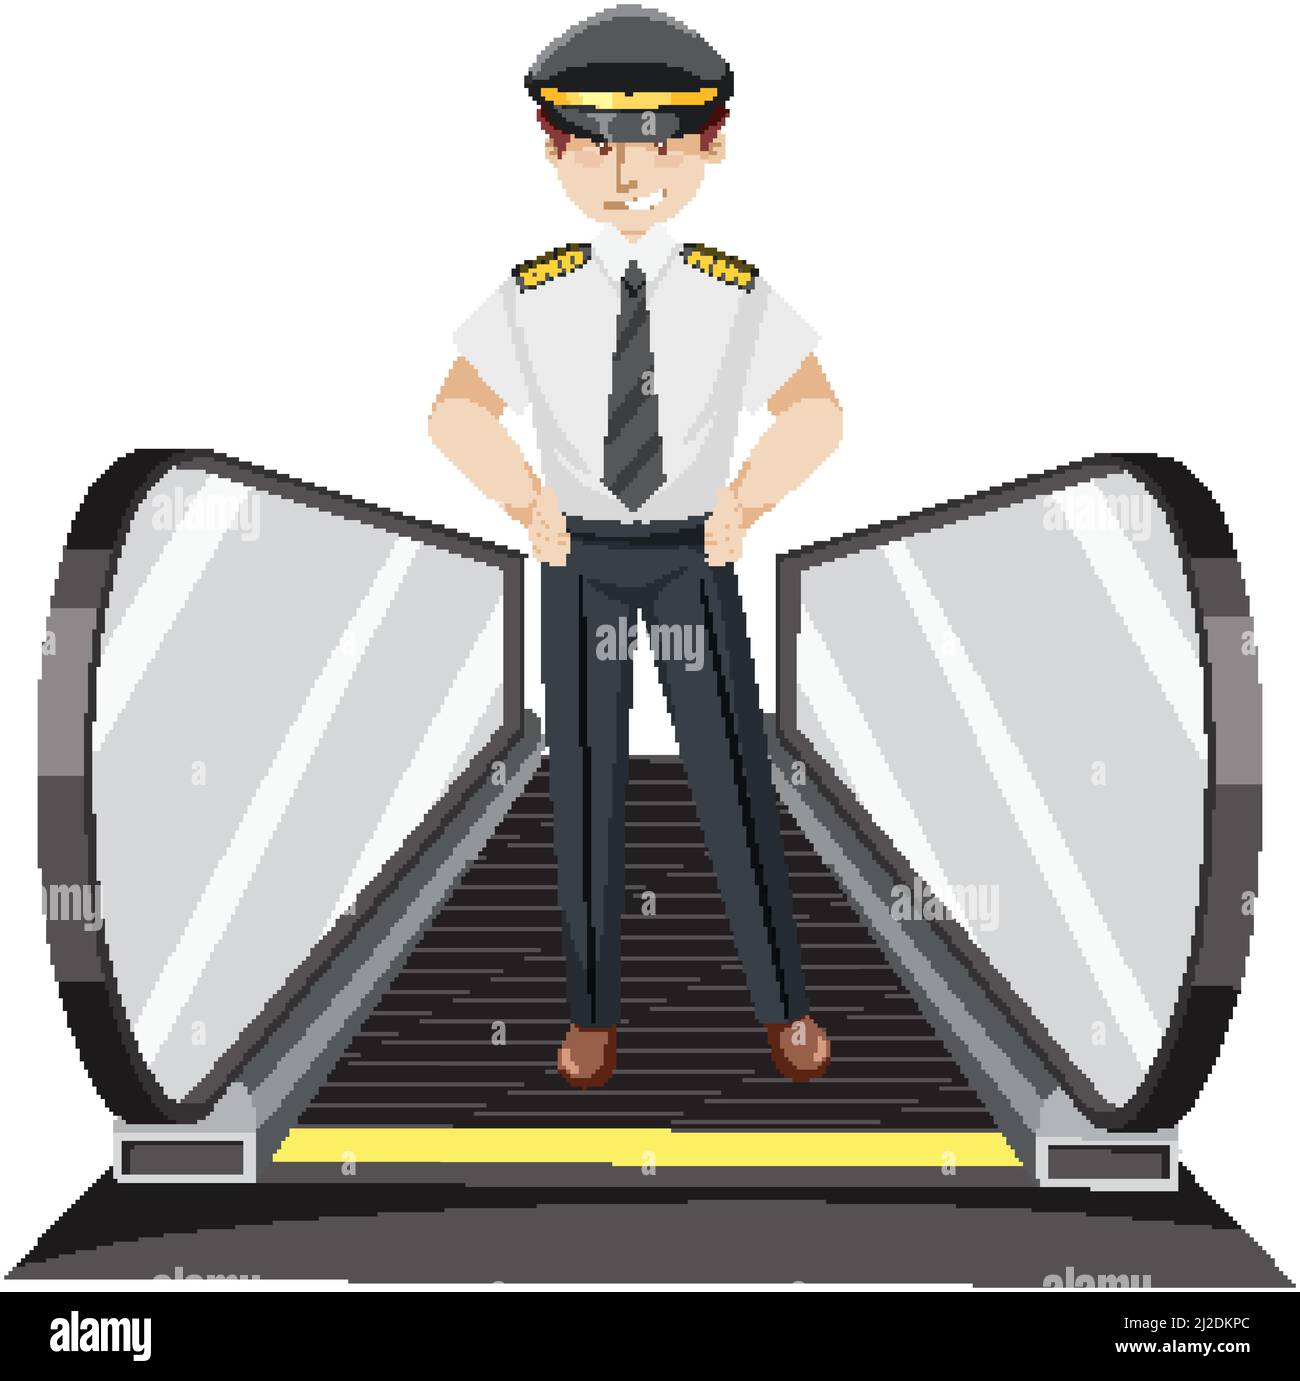 A pilot standing on moving walkway illustration Stock Vector